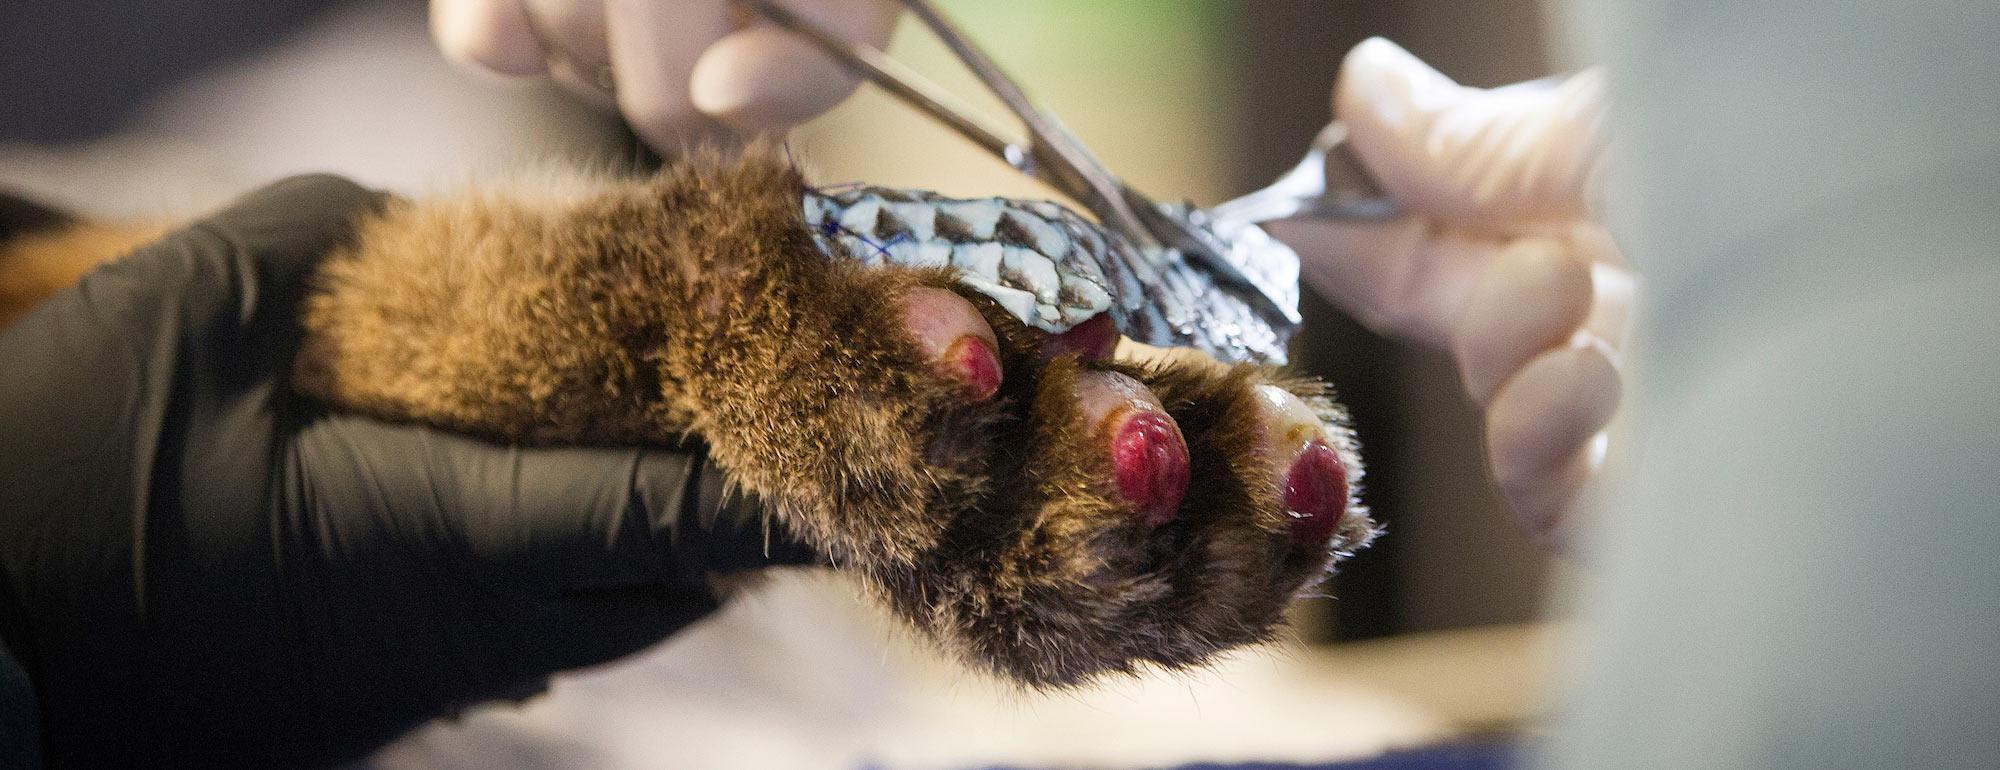 Tilapia skins behing applied to the burned foot of a mountain lion